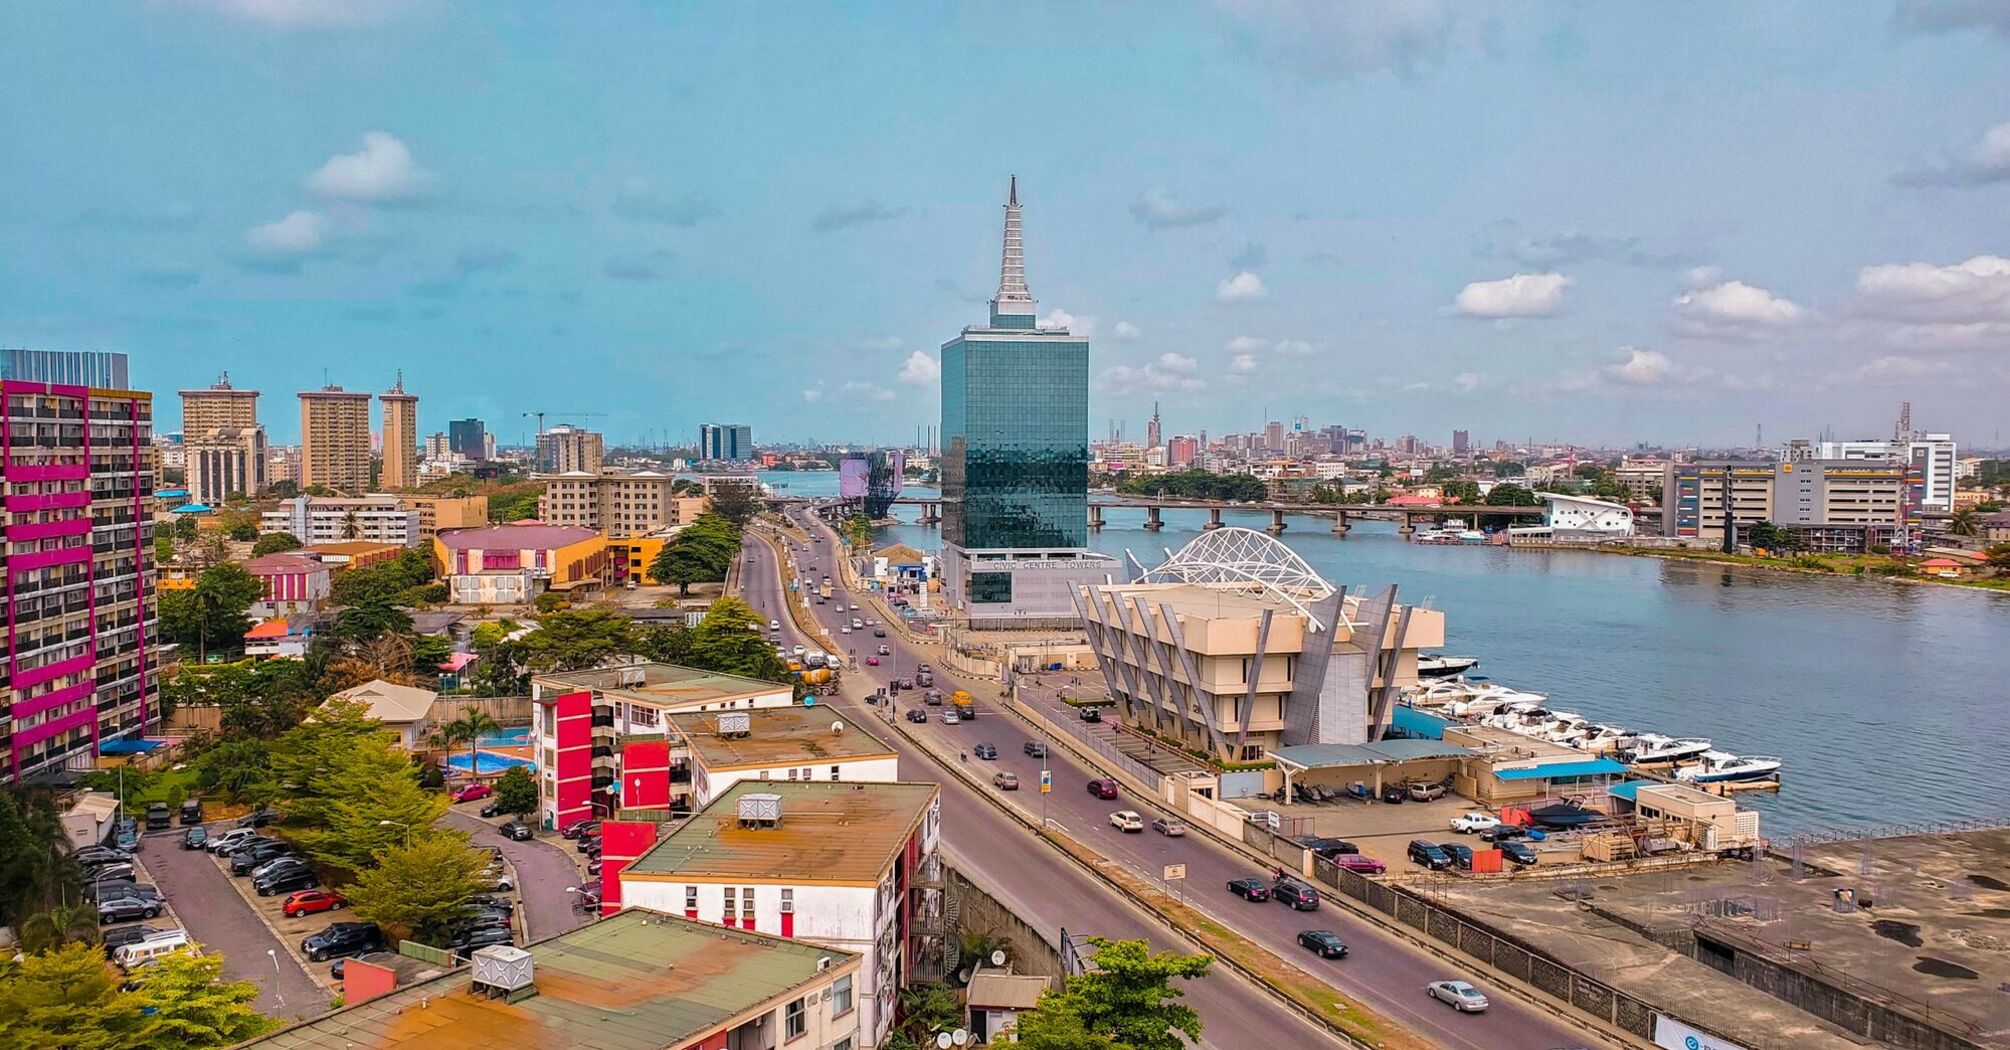 Aerial view of Lagos, Nigeria, showing modern buildings and a waterfront